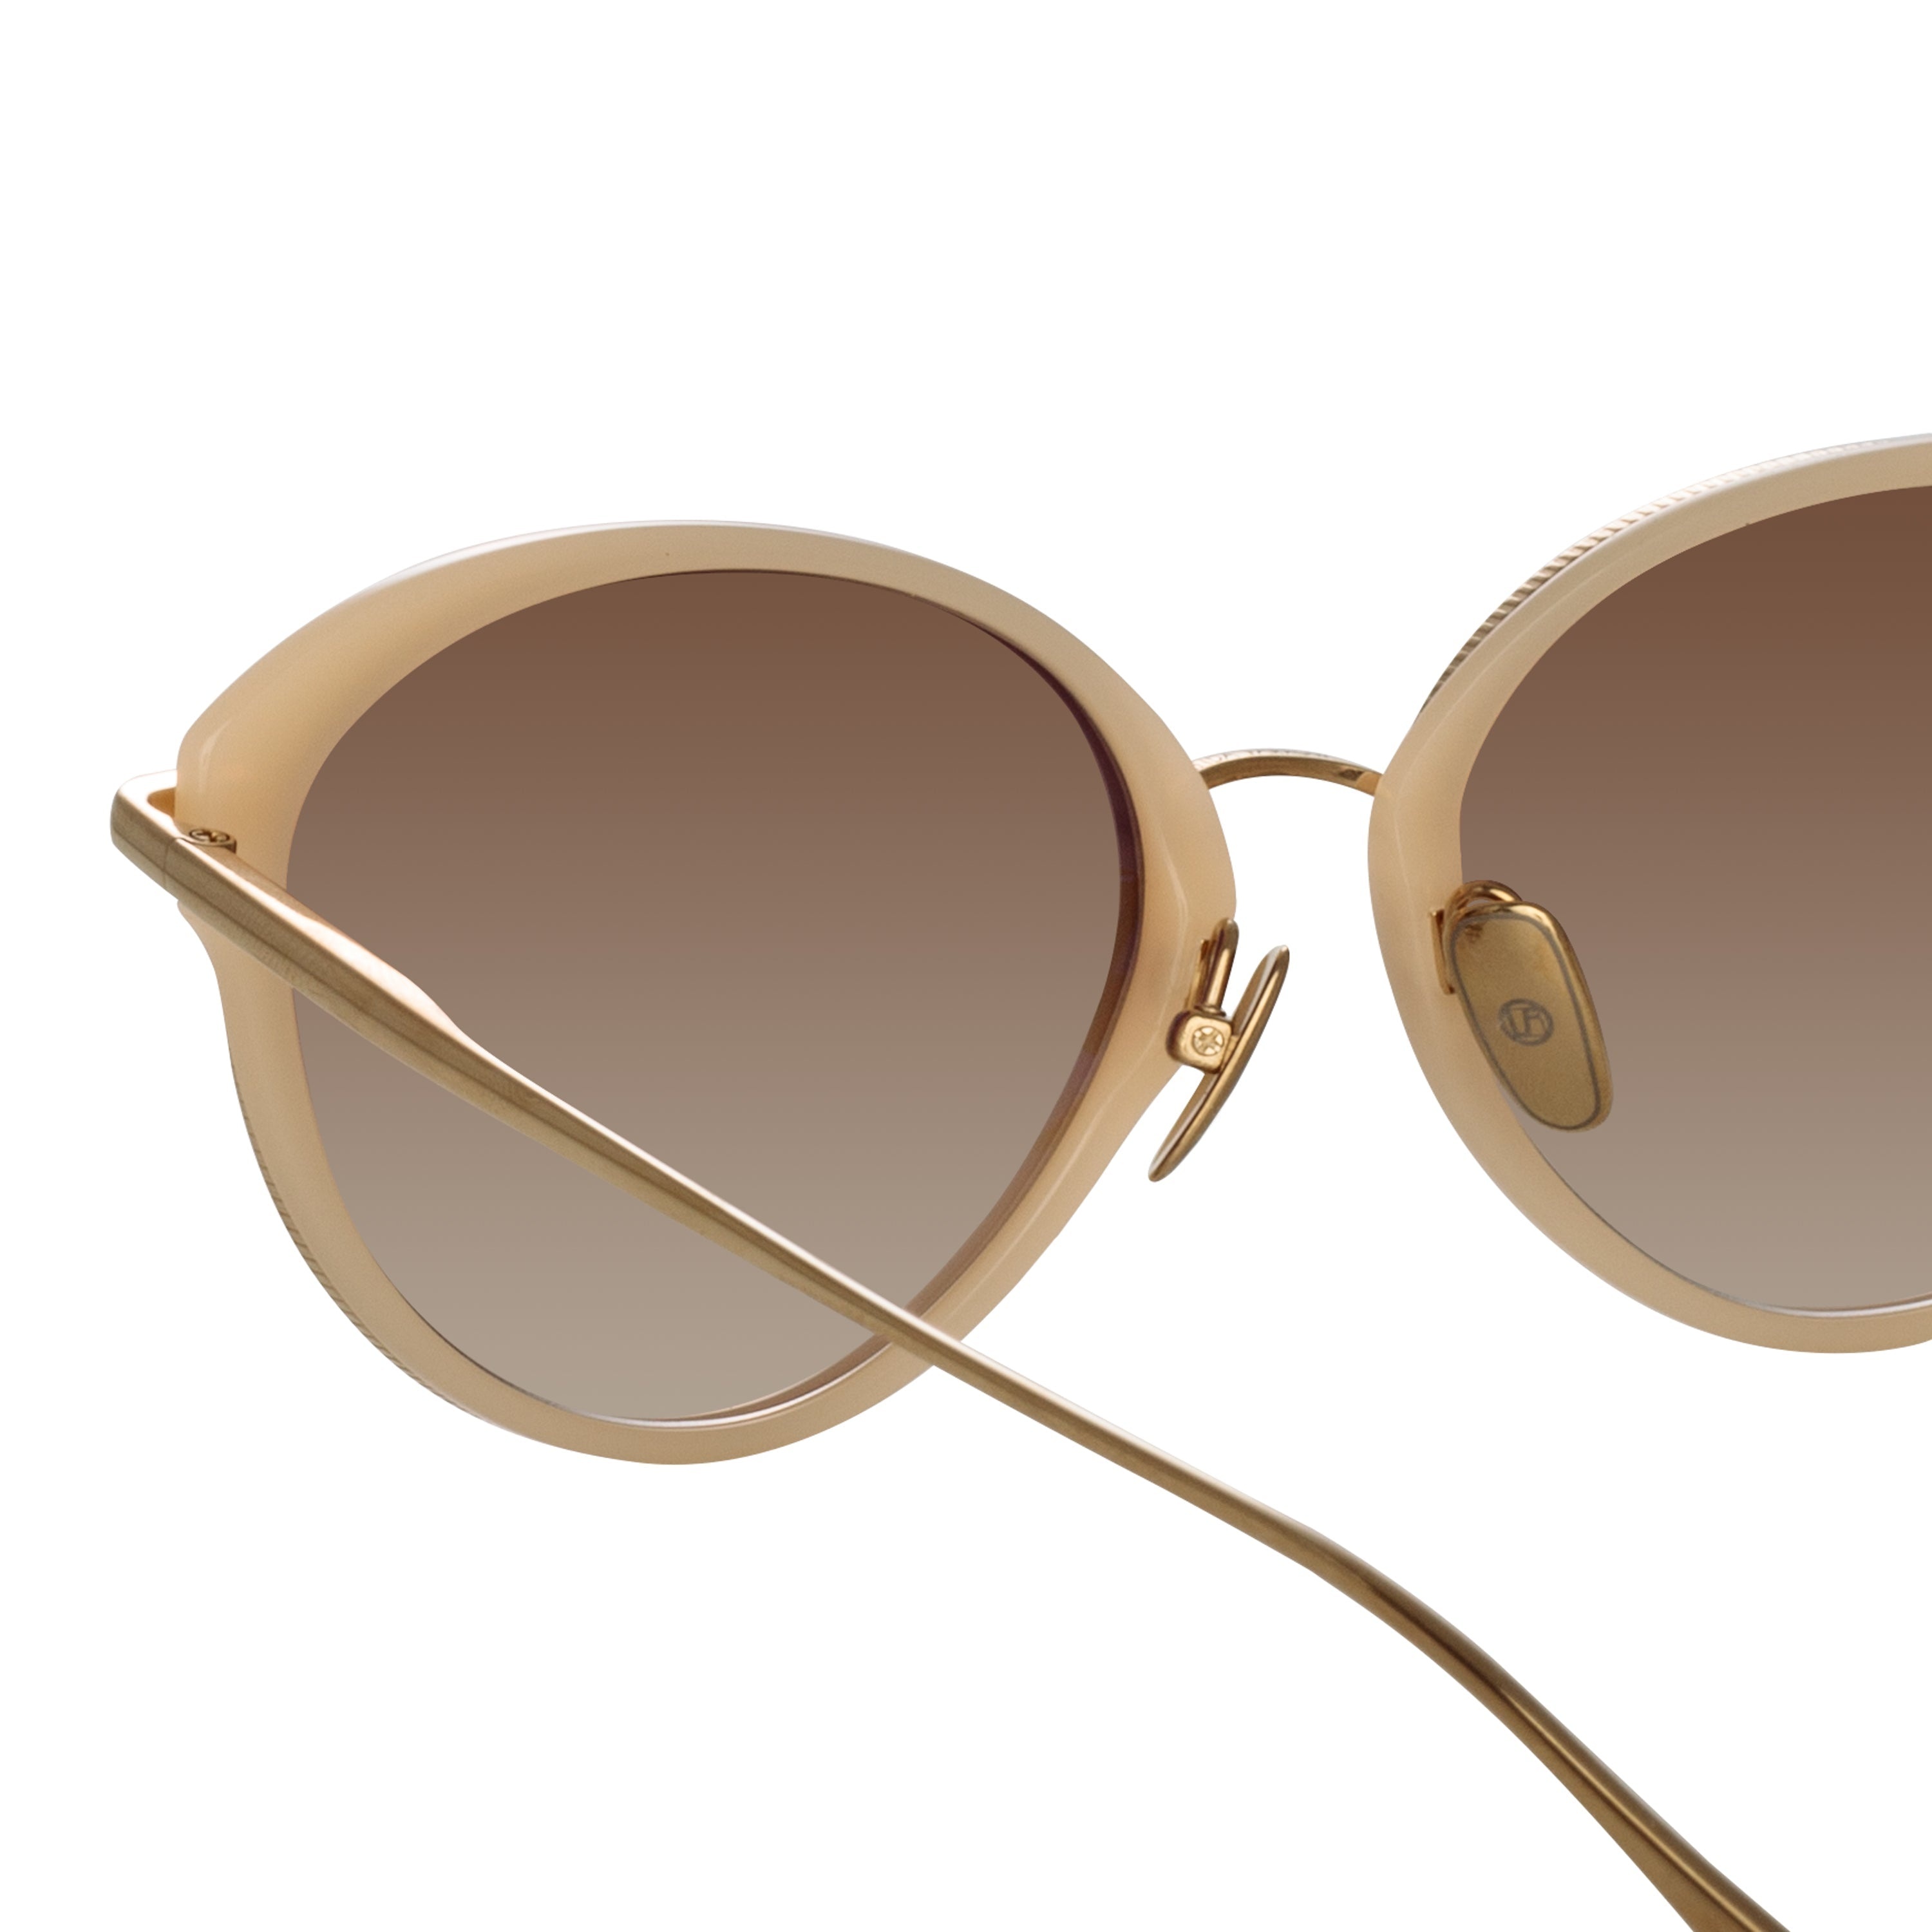 SONG CAT EYE SUNGLASSES IN LIGHT GOLD AND PEACH - 5